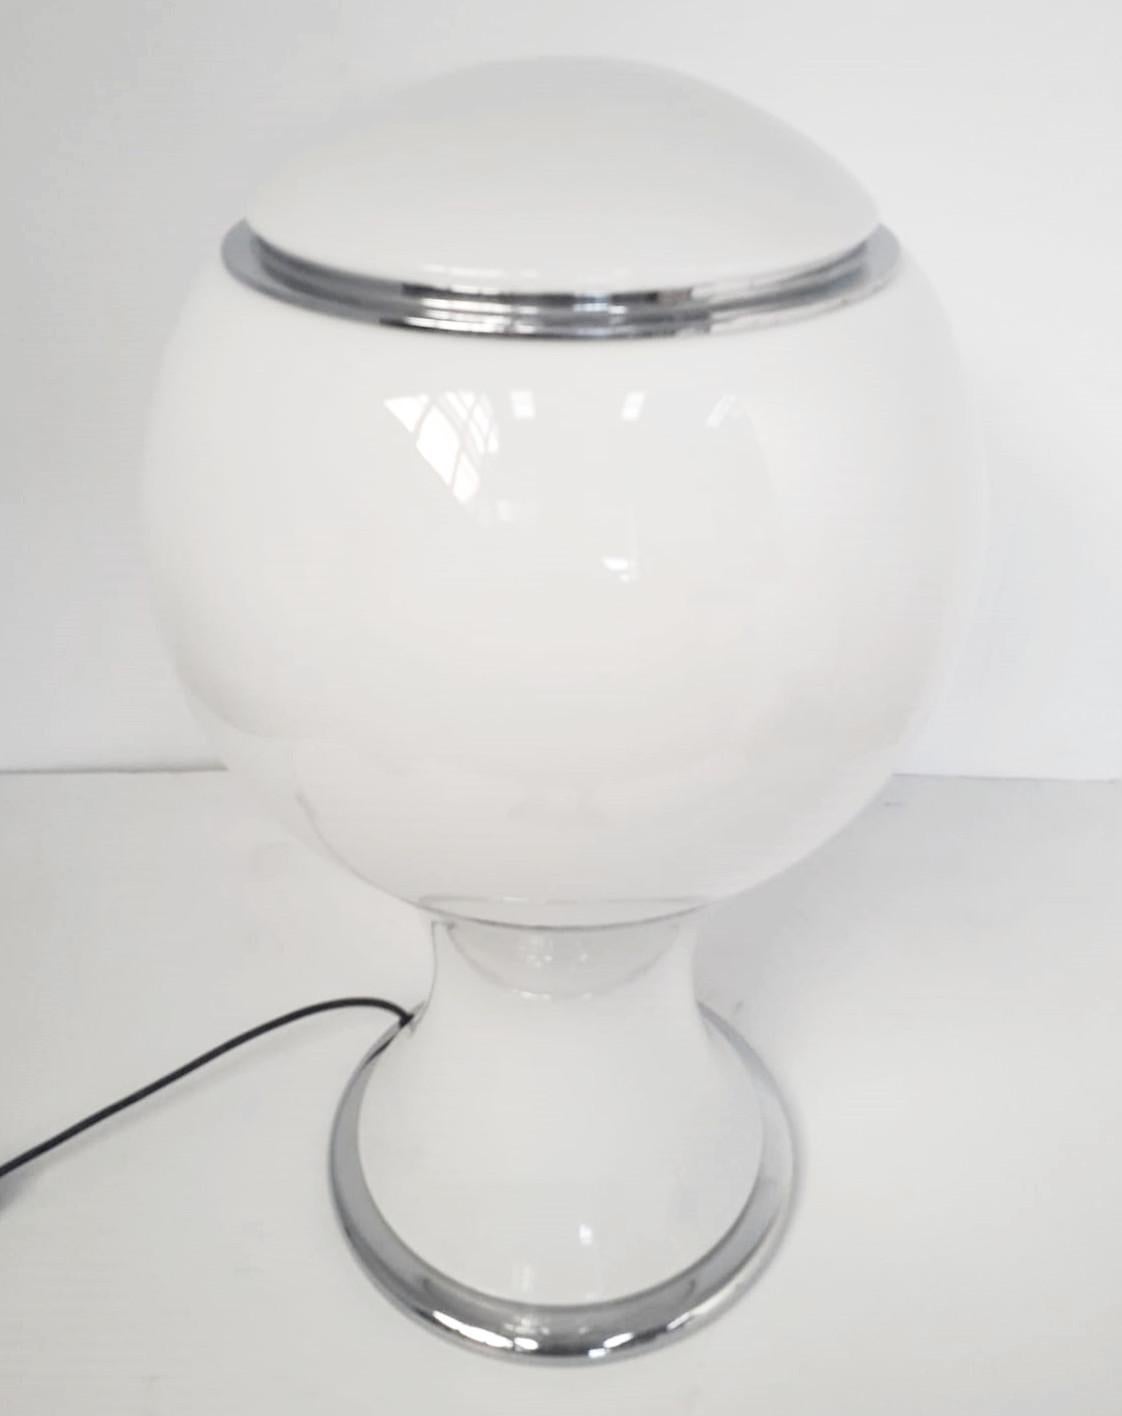 Rare Mongolfiera Lamp by Fontana Arte In Good Condition For Sale In Los Angeles, CA